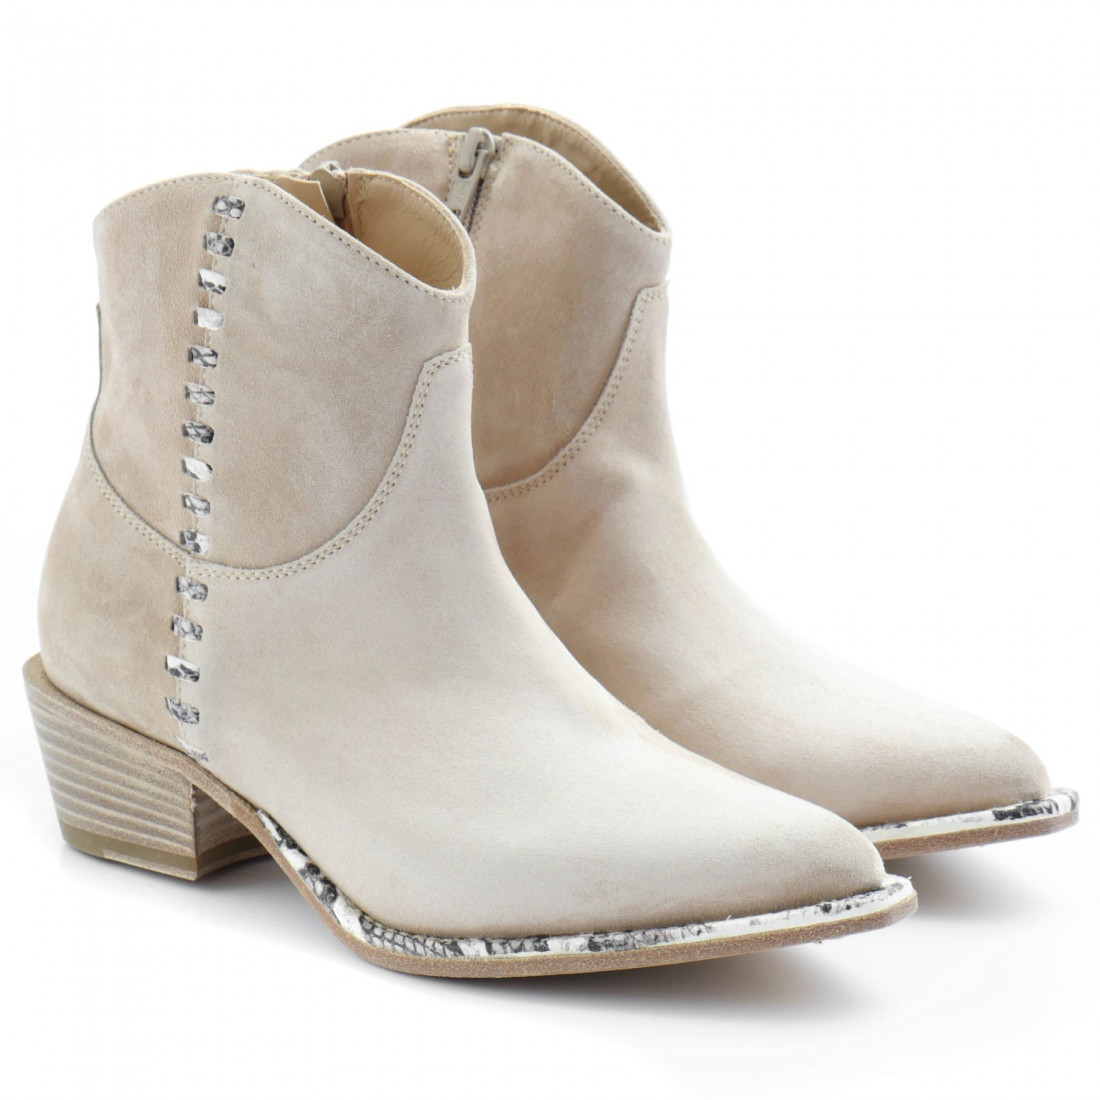 Laura Bellariva women's camperos ankle boot in beige leather